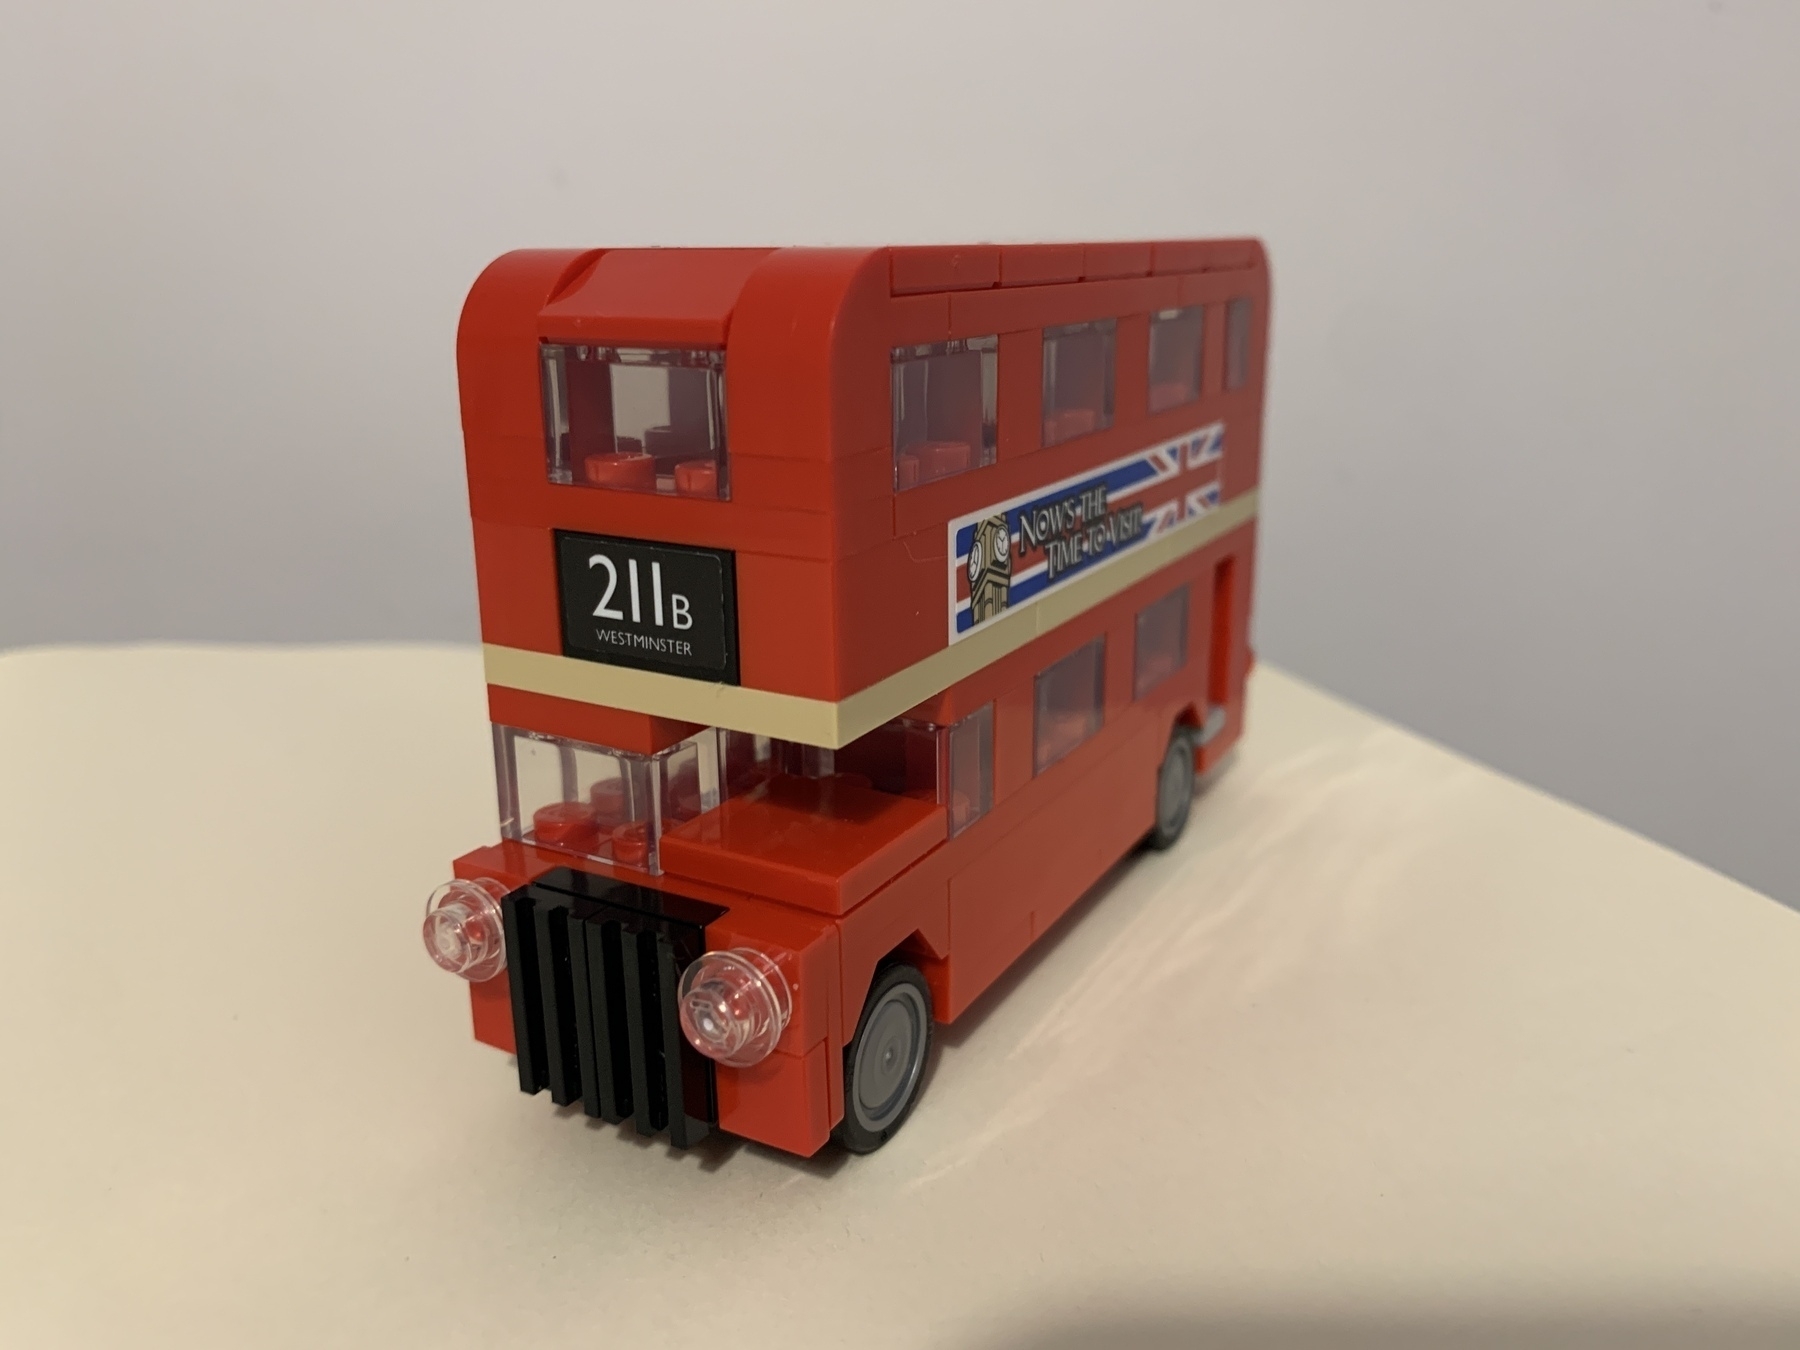 Small lego red London bus. The buses destination plate reads 211B Westminster. On the side of the bus is an adverstiment that reads Now is the time to visit. The background of the advert is the union flag and the top of Big Ben. The bus is sat on a cream colored base with a white/grey background